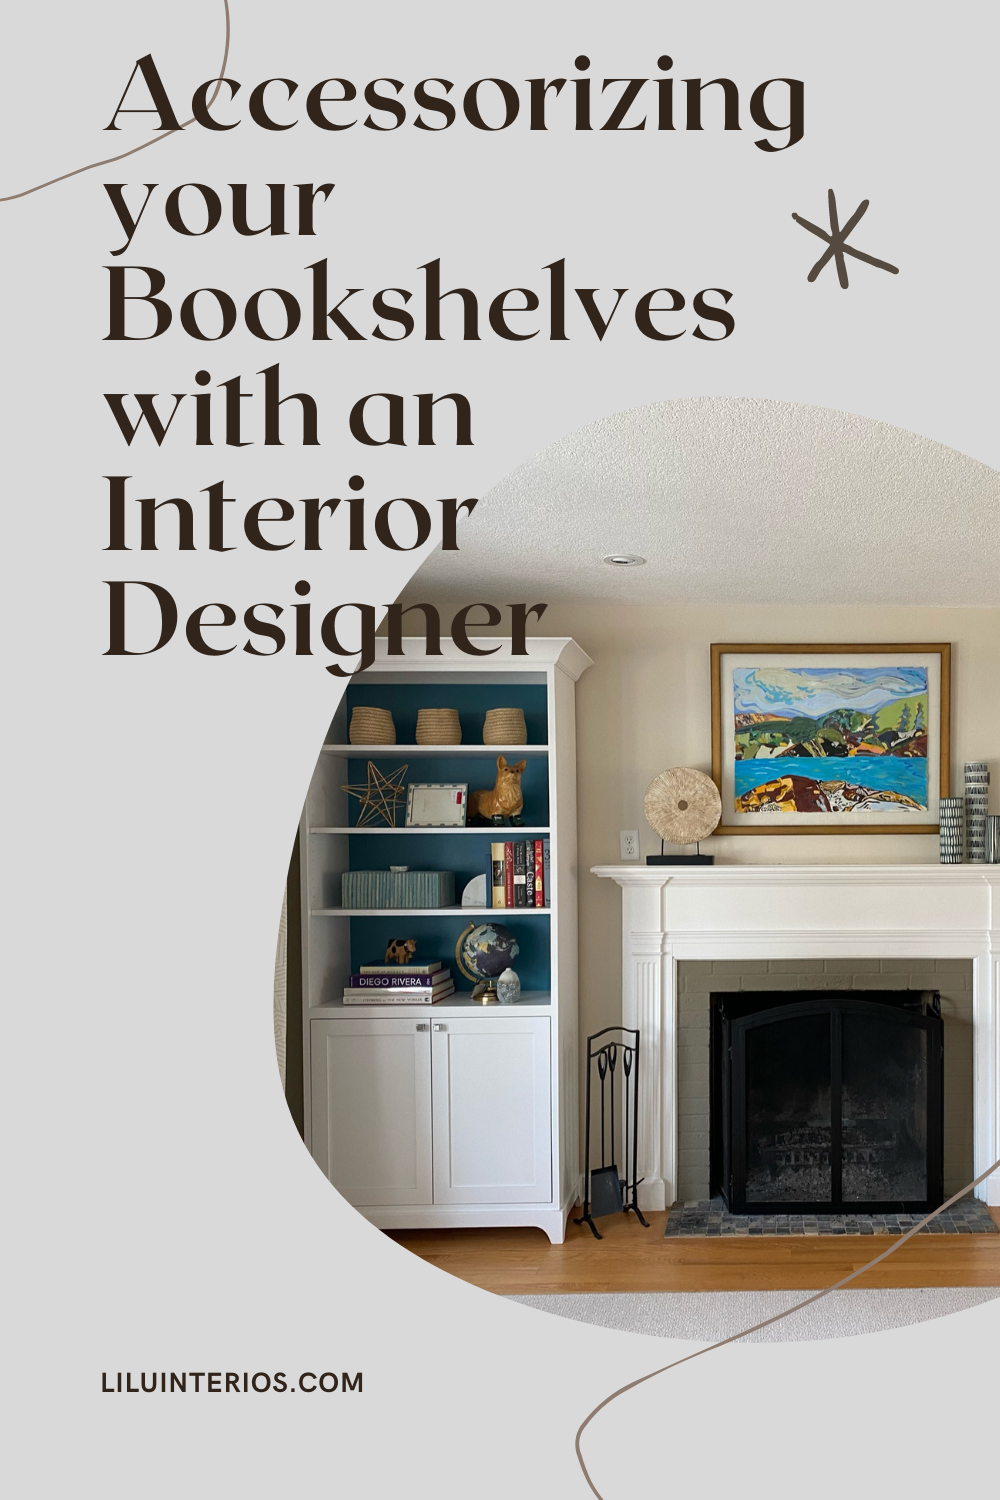 Accessorizing your Bookshelves with an Interior Designer